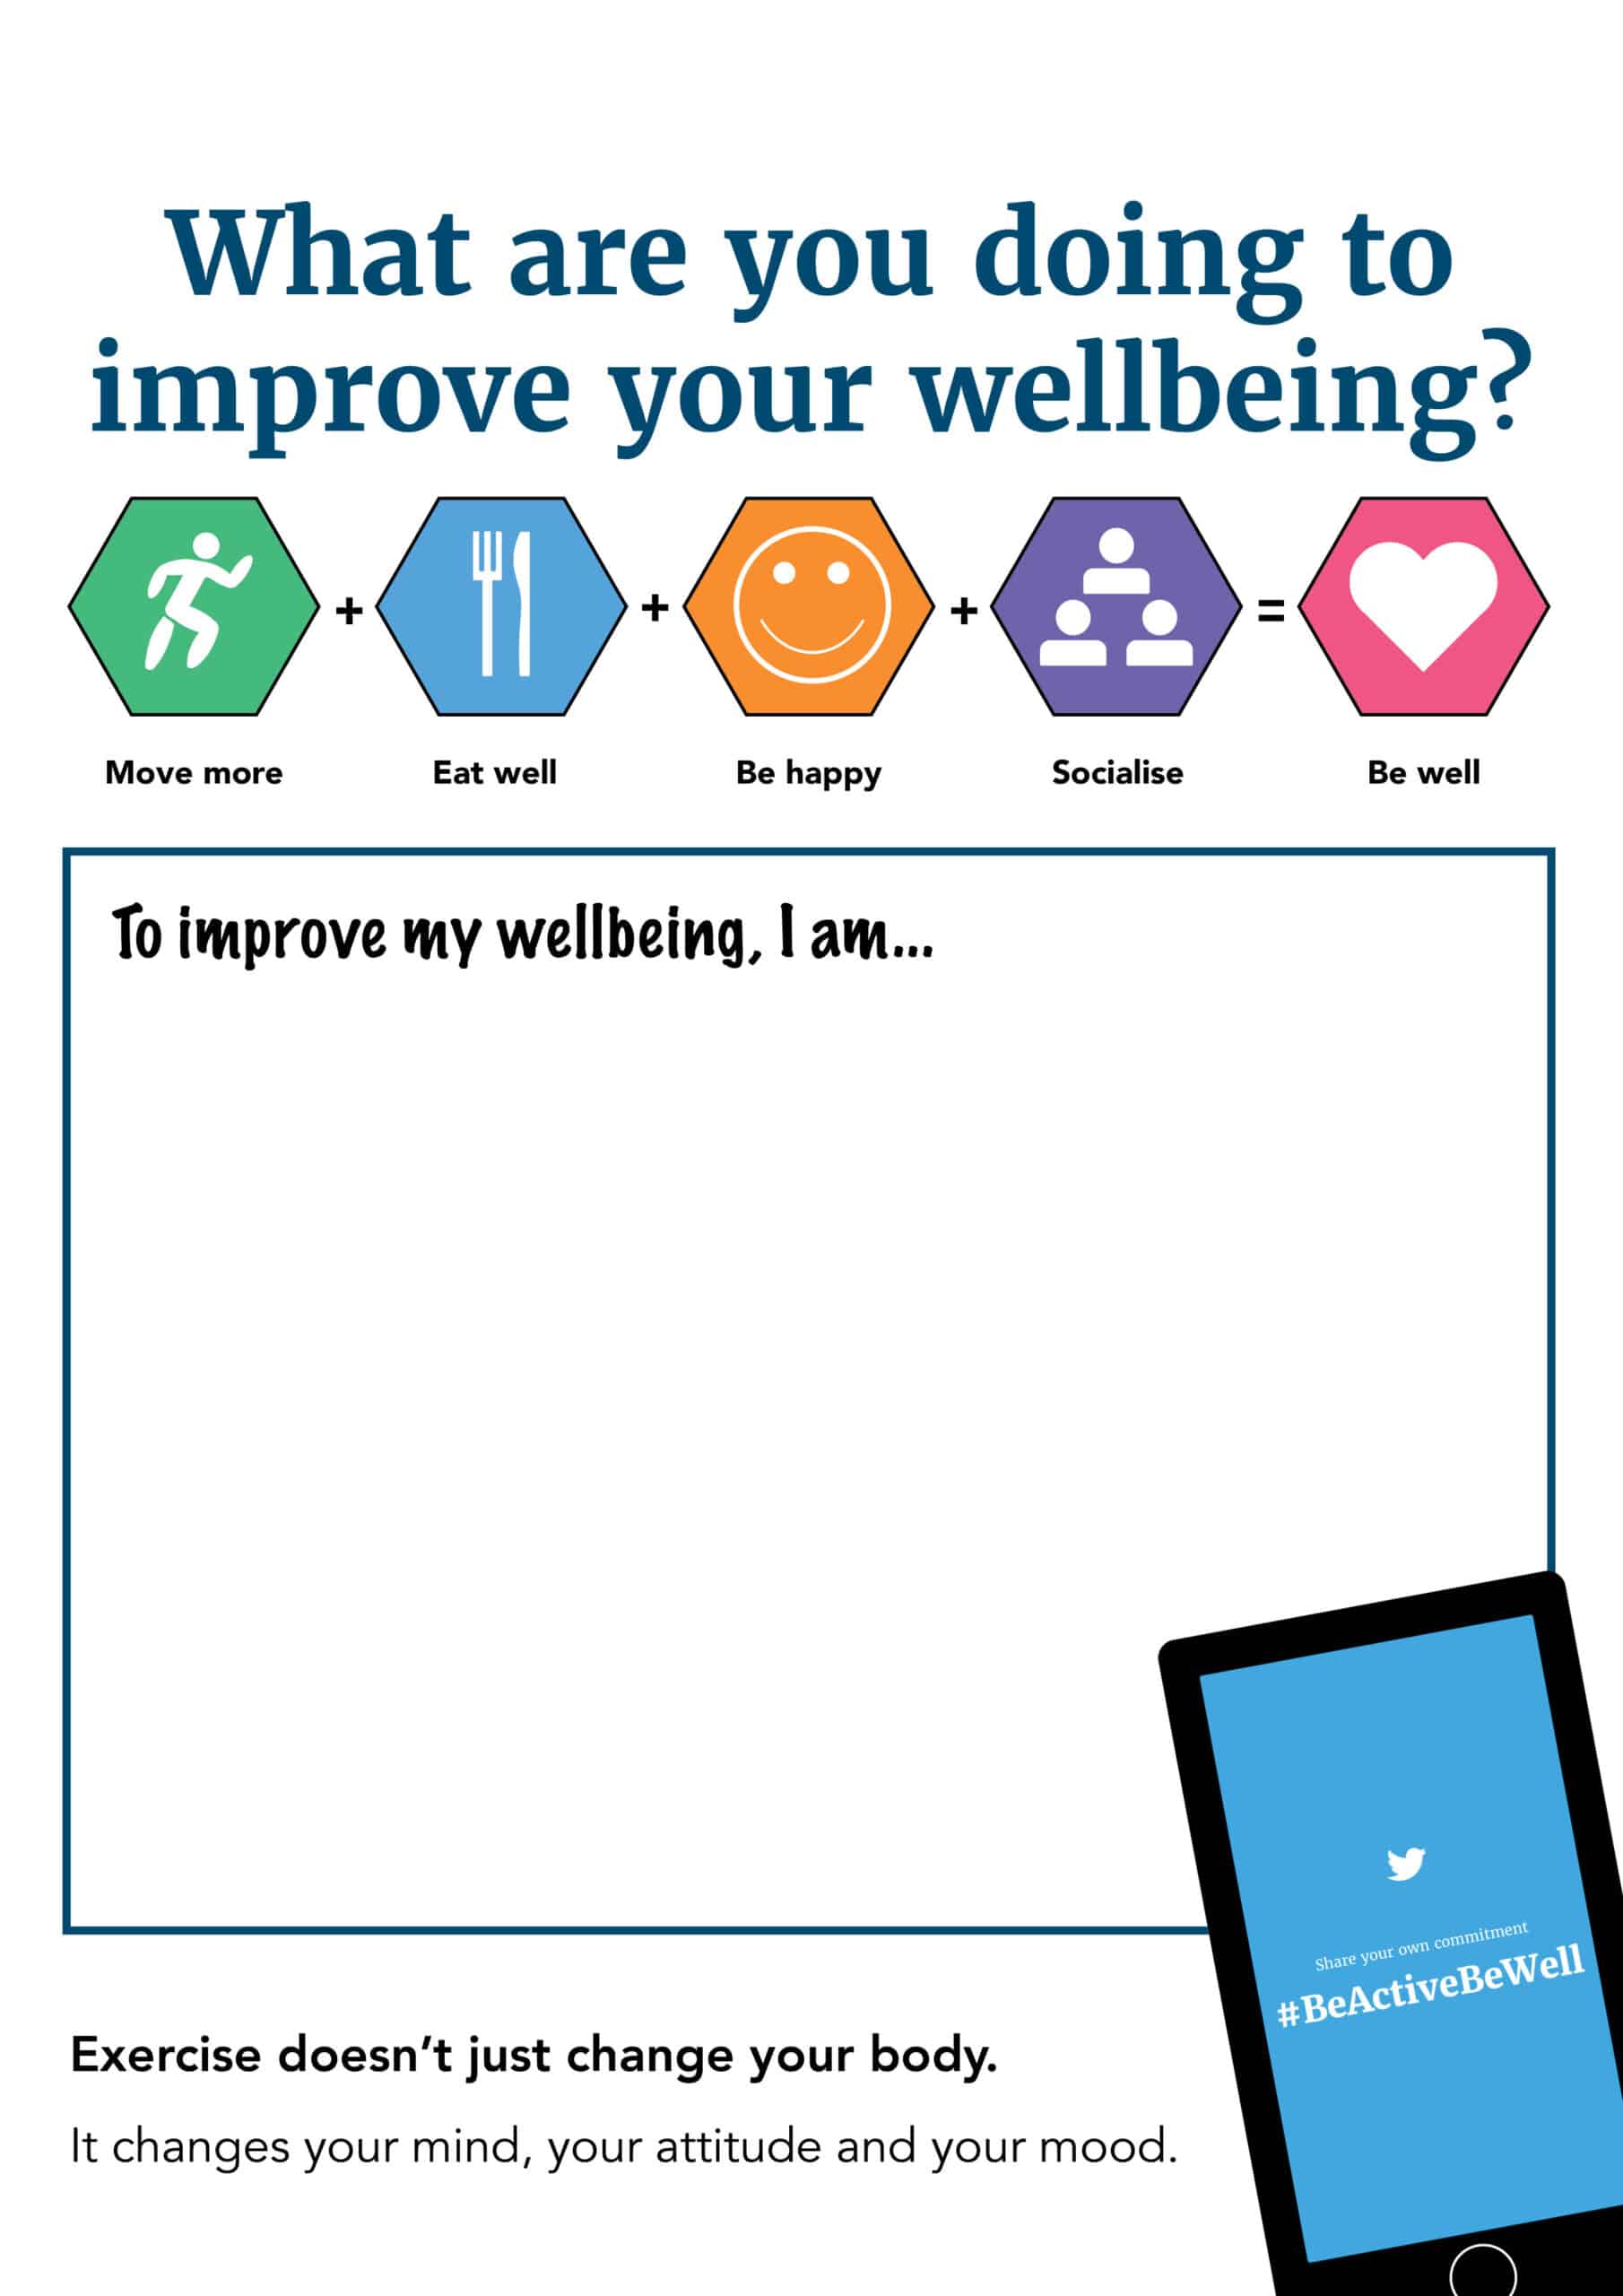 Wellbeing Poster